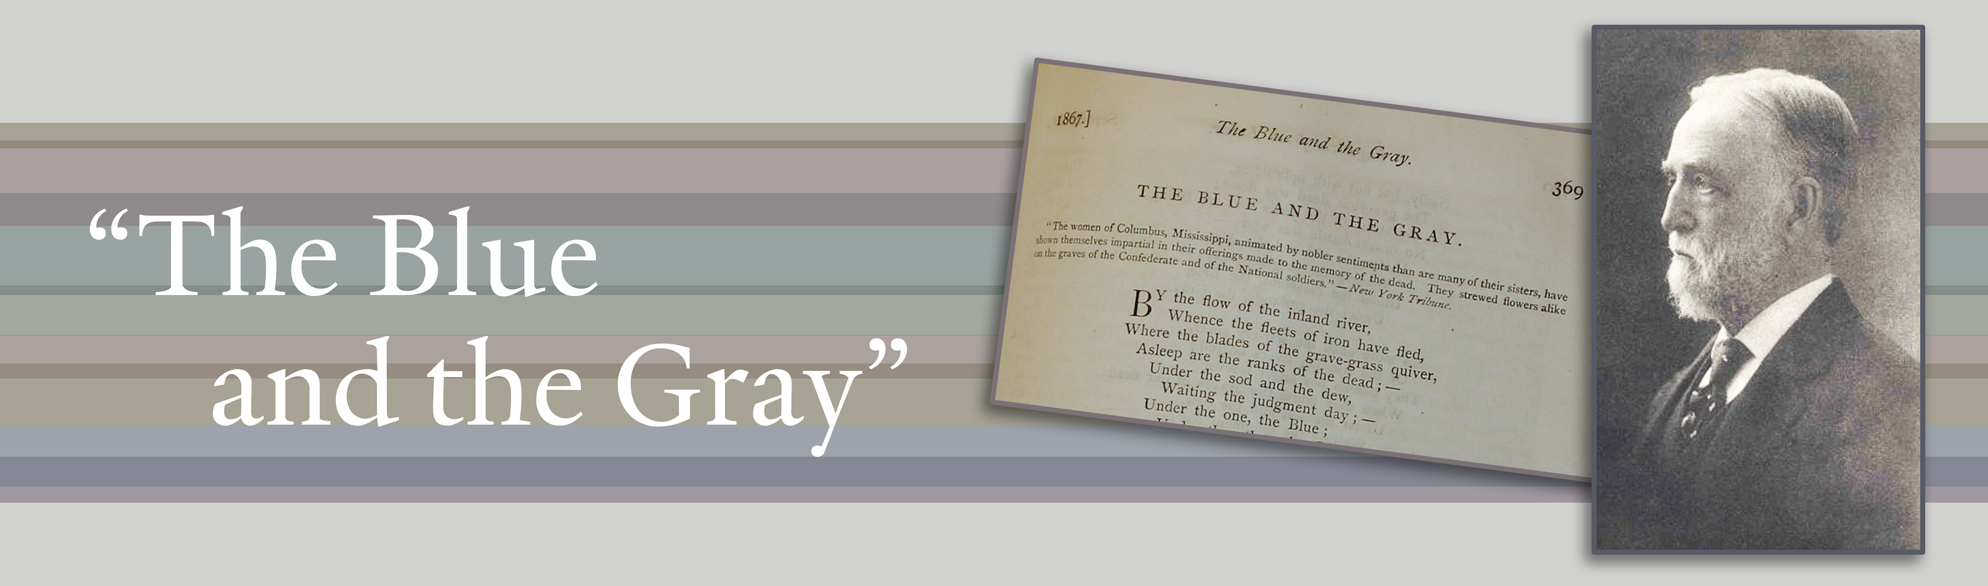 A banner graphic featuring an image of the opening lines of the Francis Miles Finch poem “The Blue and the Gray”. That image is overlapped by a black and white portrait of Francis Miles Finchportrait of  